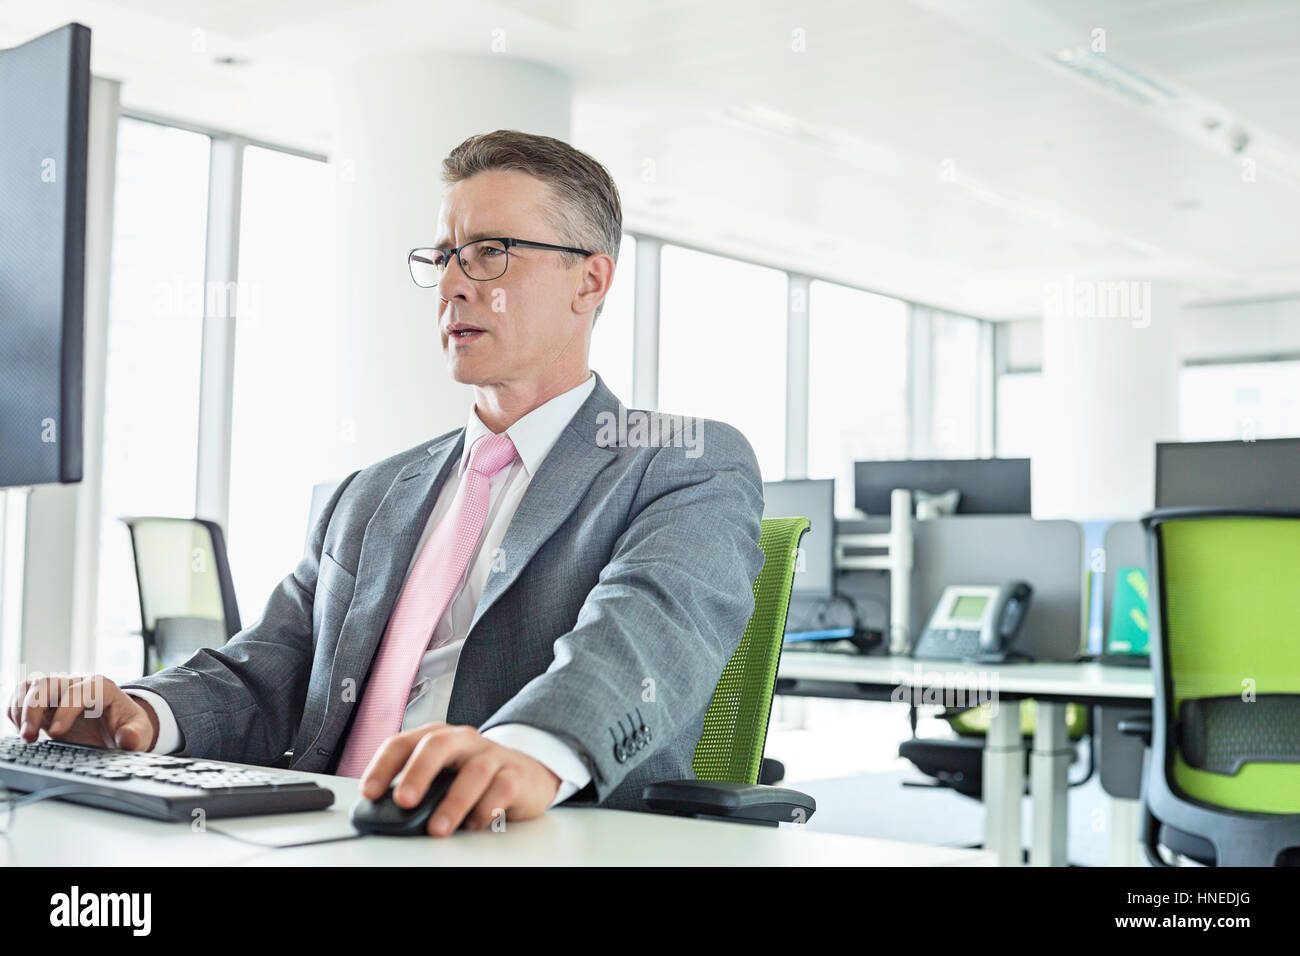 Mature businessman working on computer in office Banque D'Images